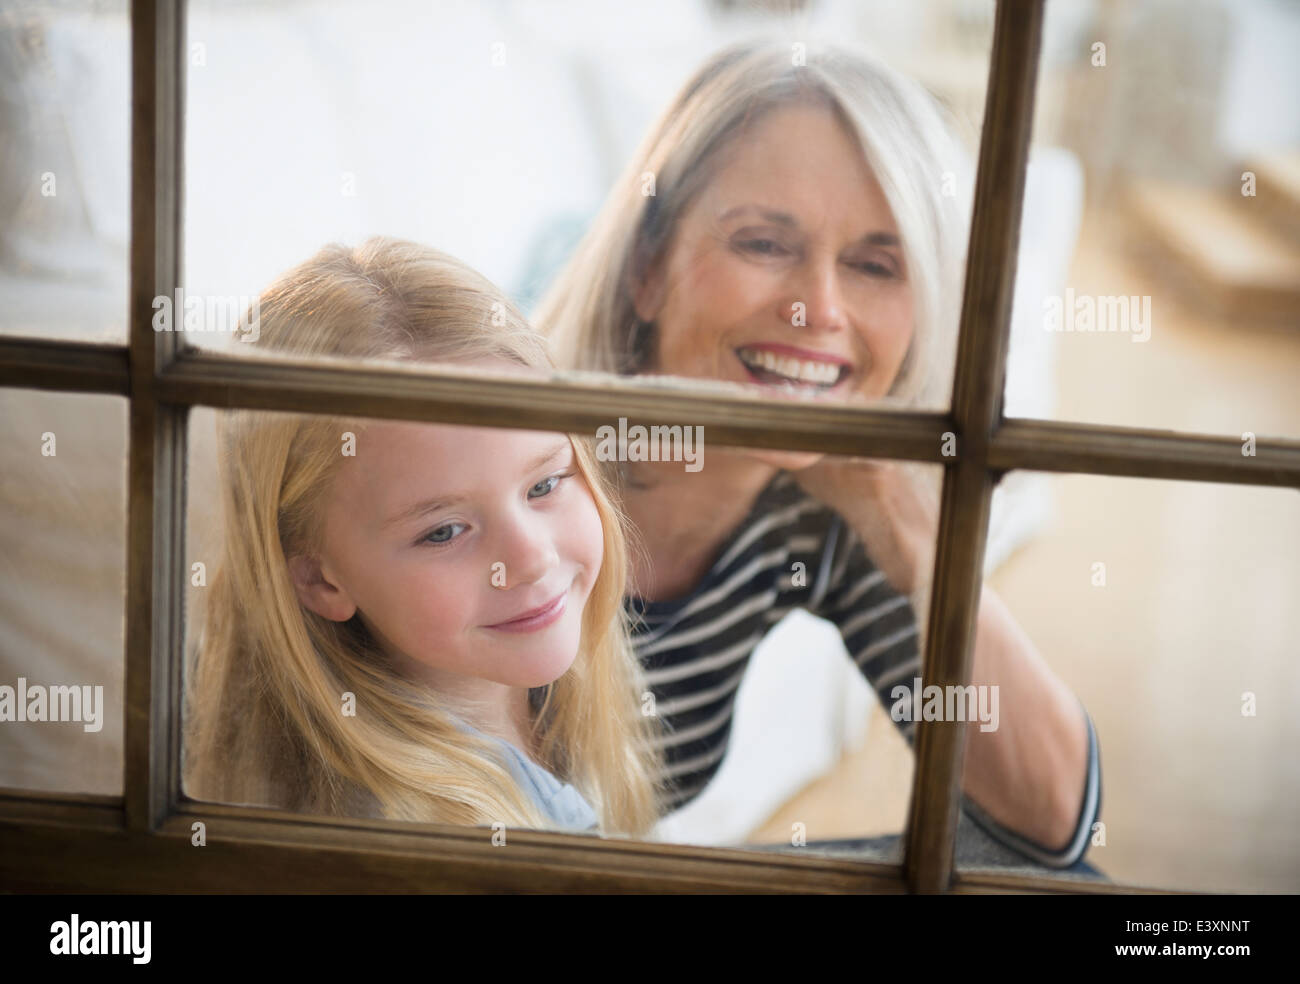 Woman and granddaughter looking out window Banque D'Images